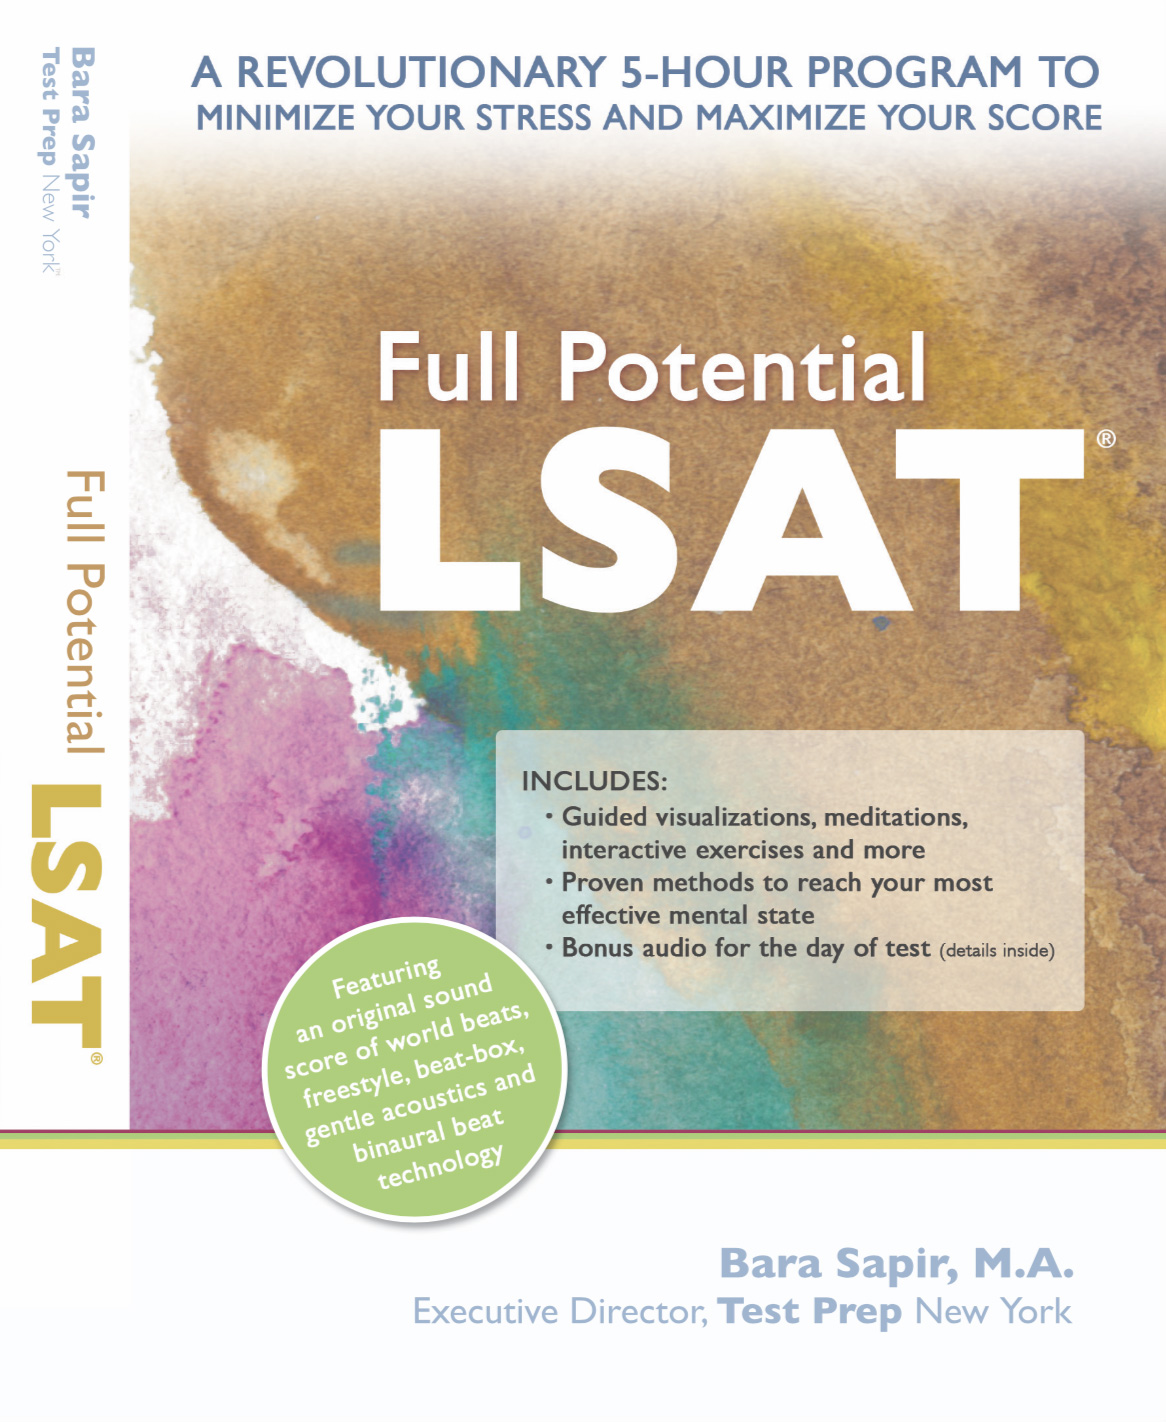 The Benefits of Blind Review on the LSAT